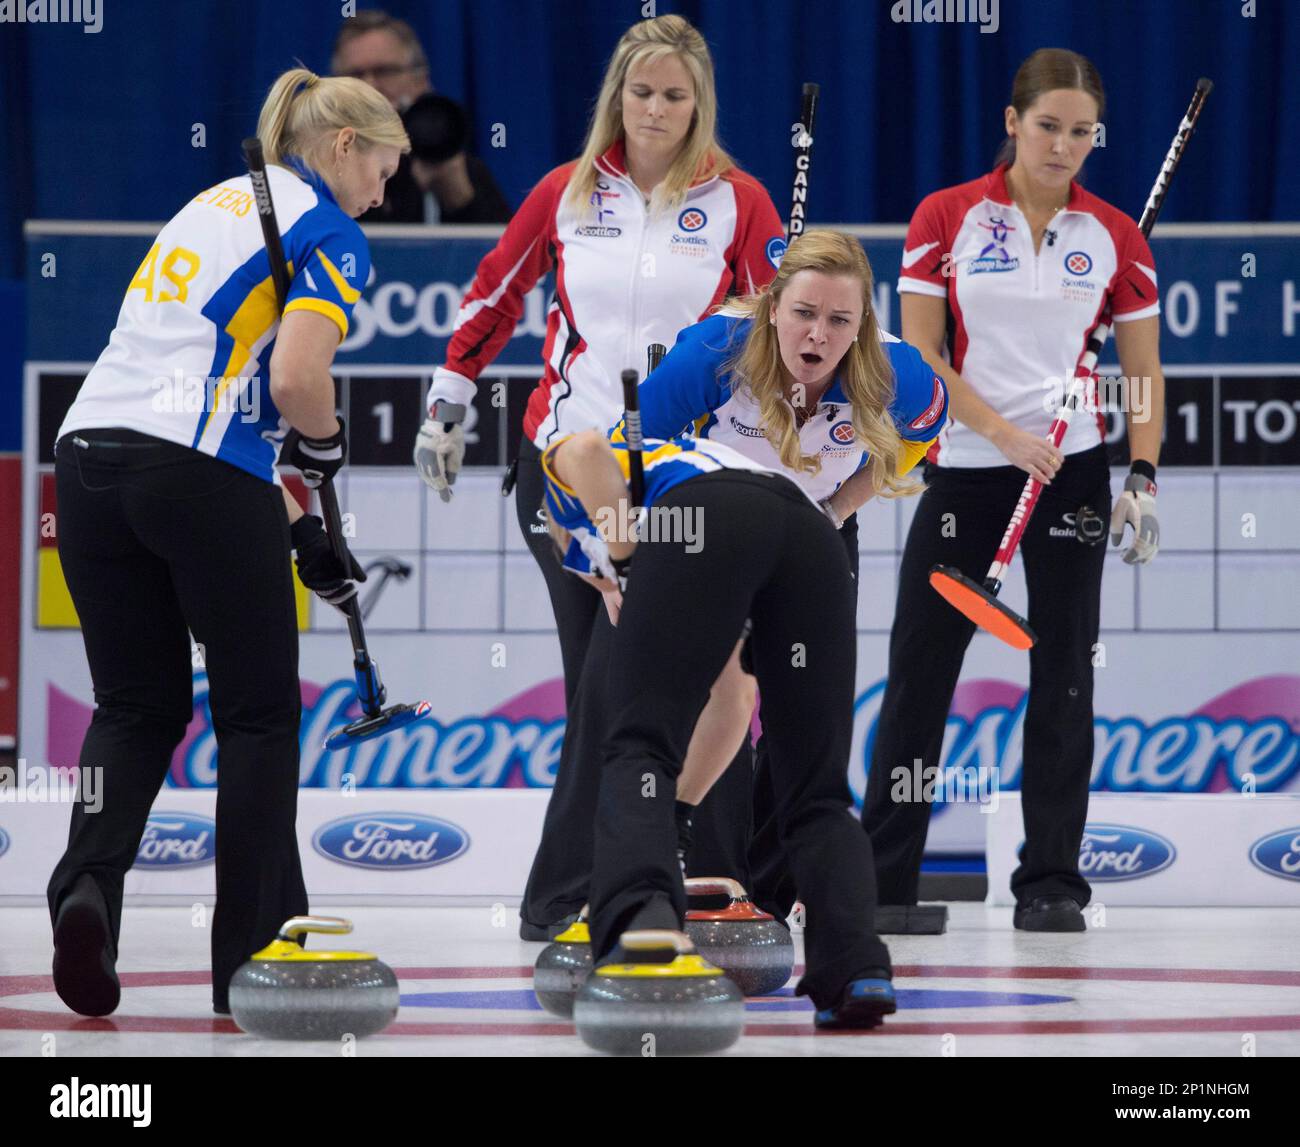 Canada skip Jennifer Jones and third Kaitlyn Lawes watch as Alberta skip Chelsea Carey calls a shot into the during the page playoff at the Scotties Tournament of Hearts curling event Friday,